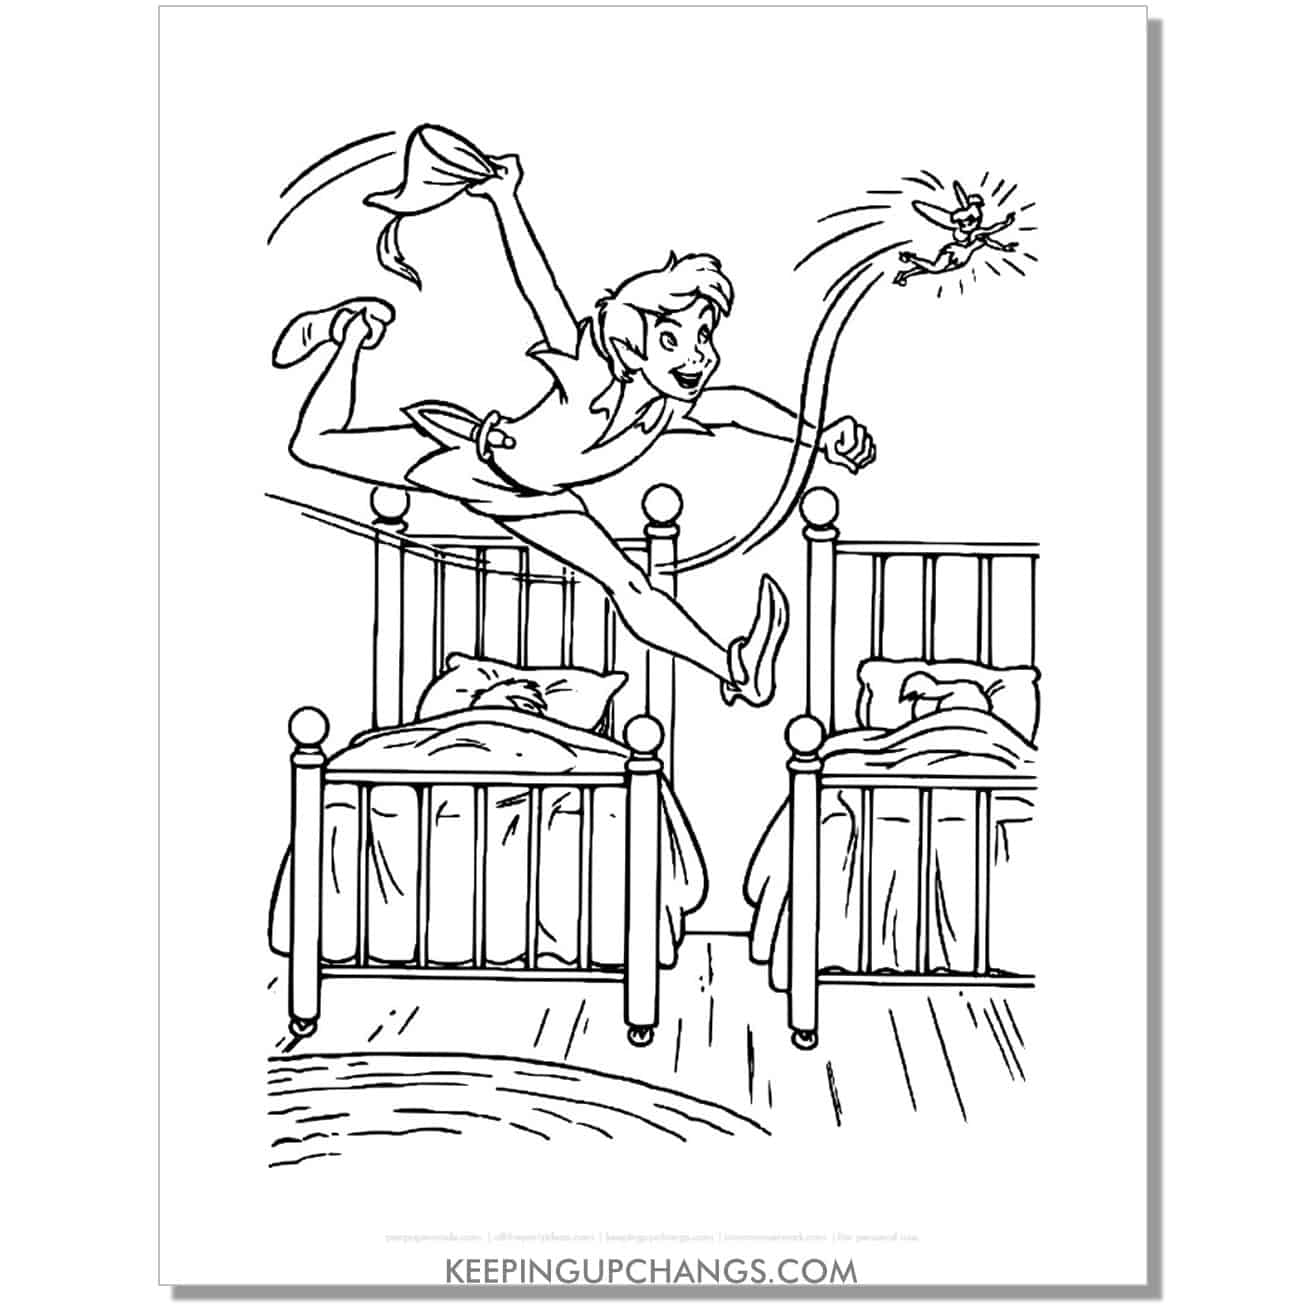 tinkerbell and peter pan in darling bedroom coloring page, sheet.